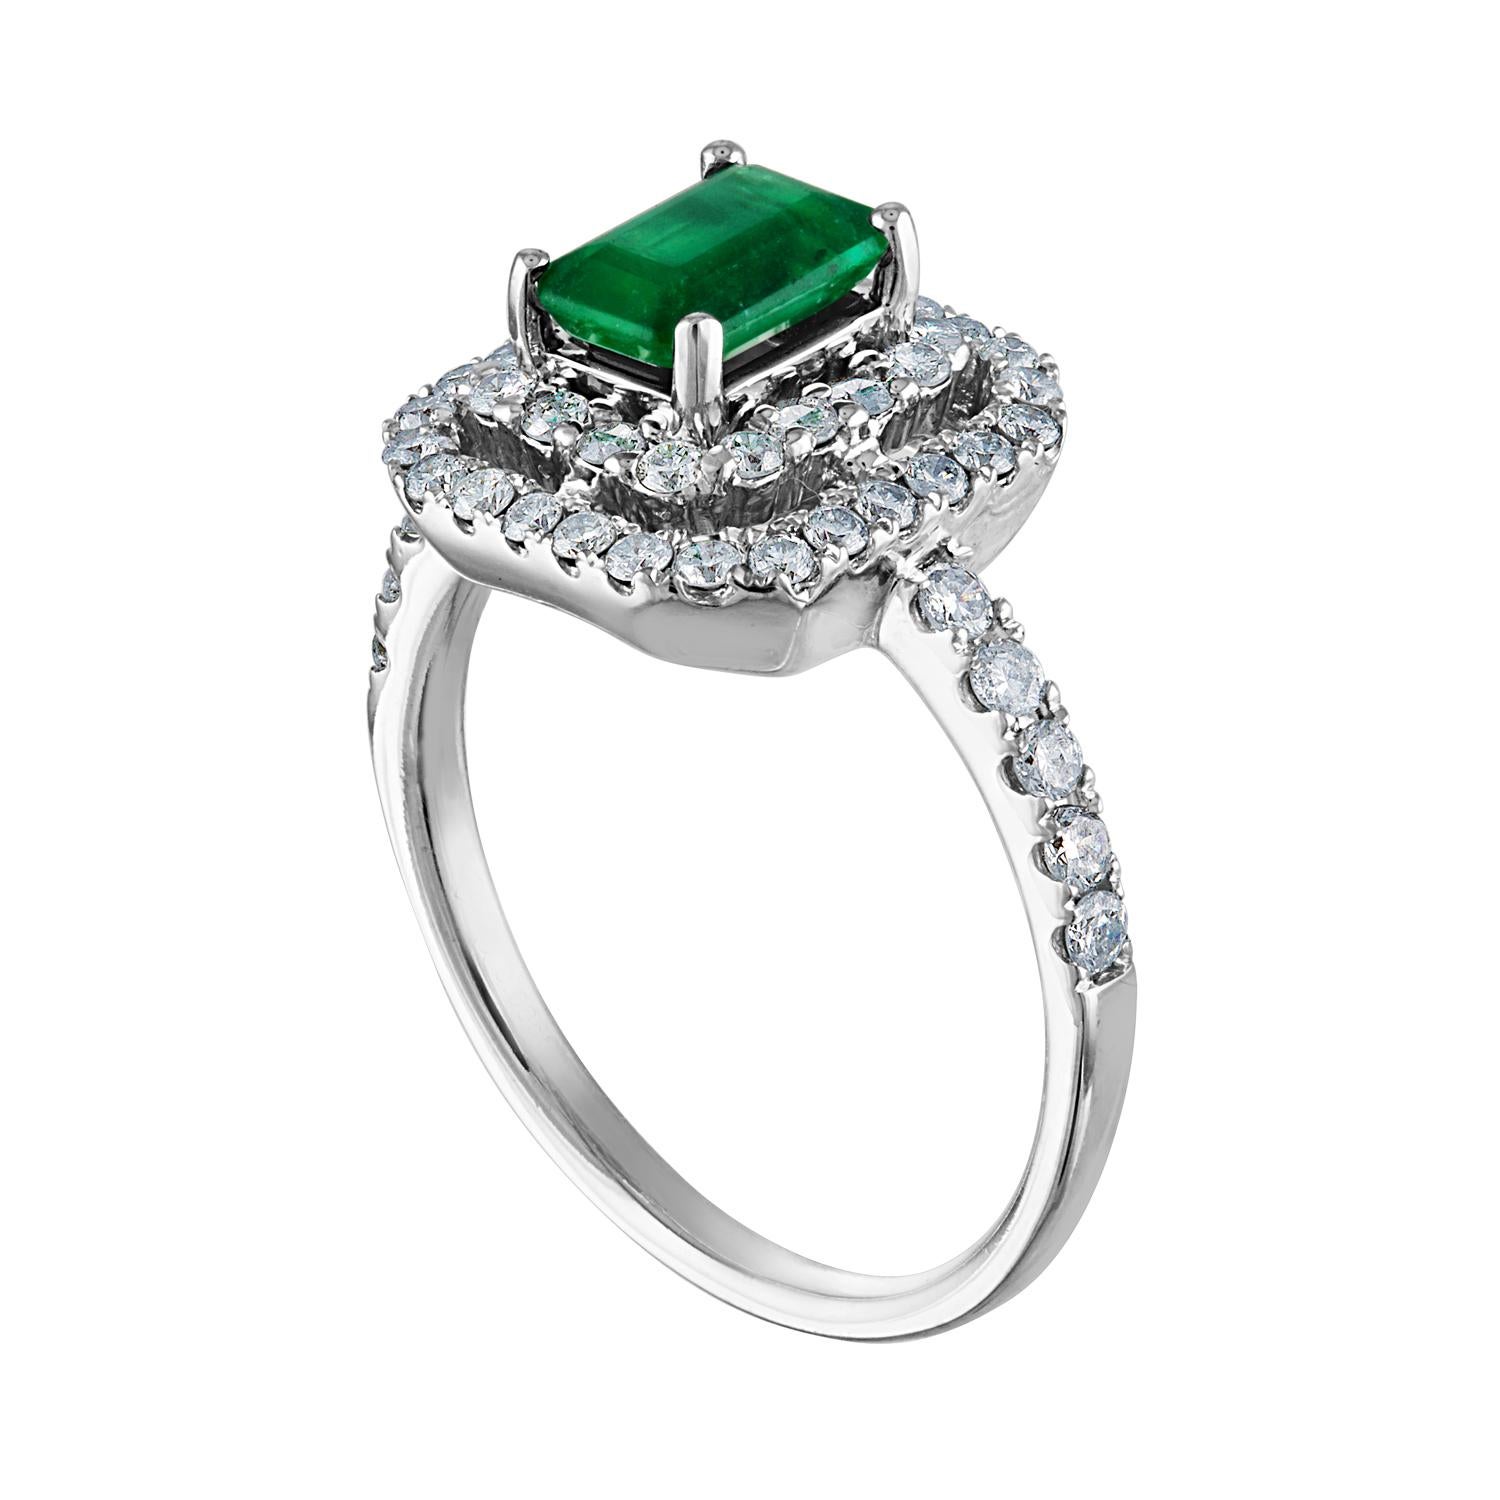 Beautiful Double Square Halo Emerald Ring
The ring is 18K White Gold.
The Center is a beautiful emerald cut 0.80 Carat Emerald.
The Emerald is AGL certified.
There are 0.58 Carats in Diamonds F/G VS/SI
The ring is a size 7.00, sizable.
The ring